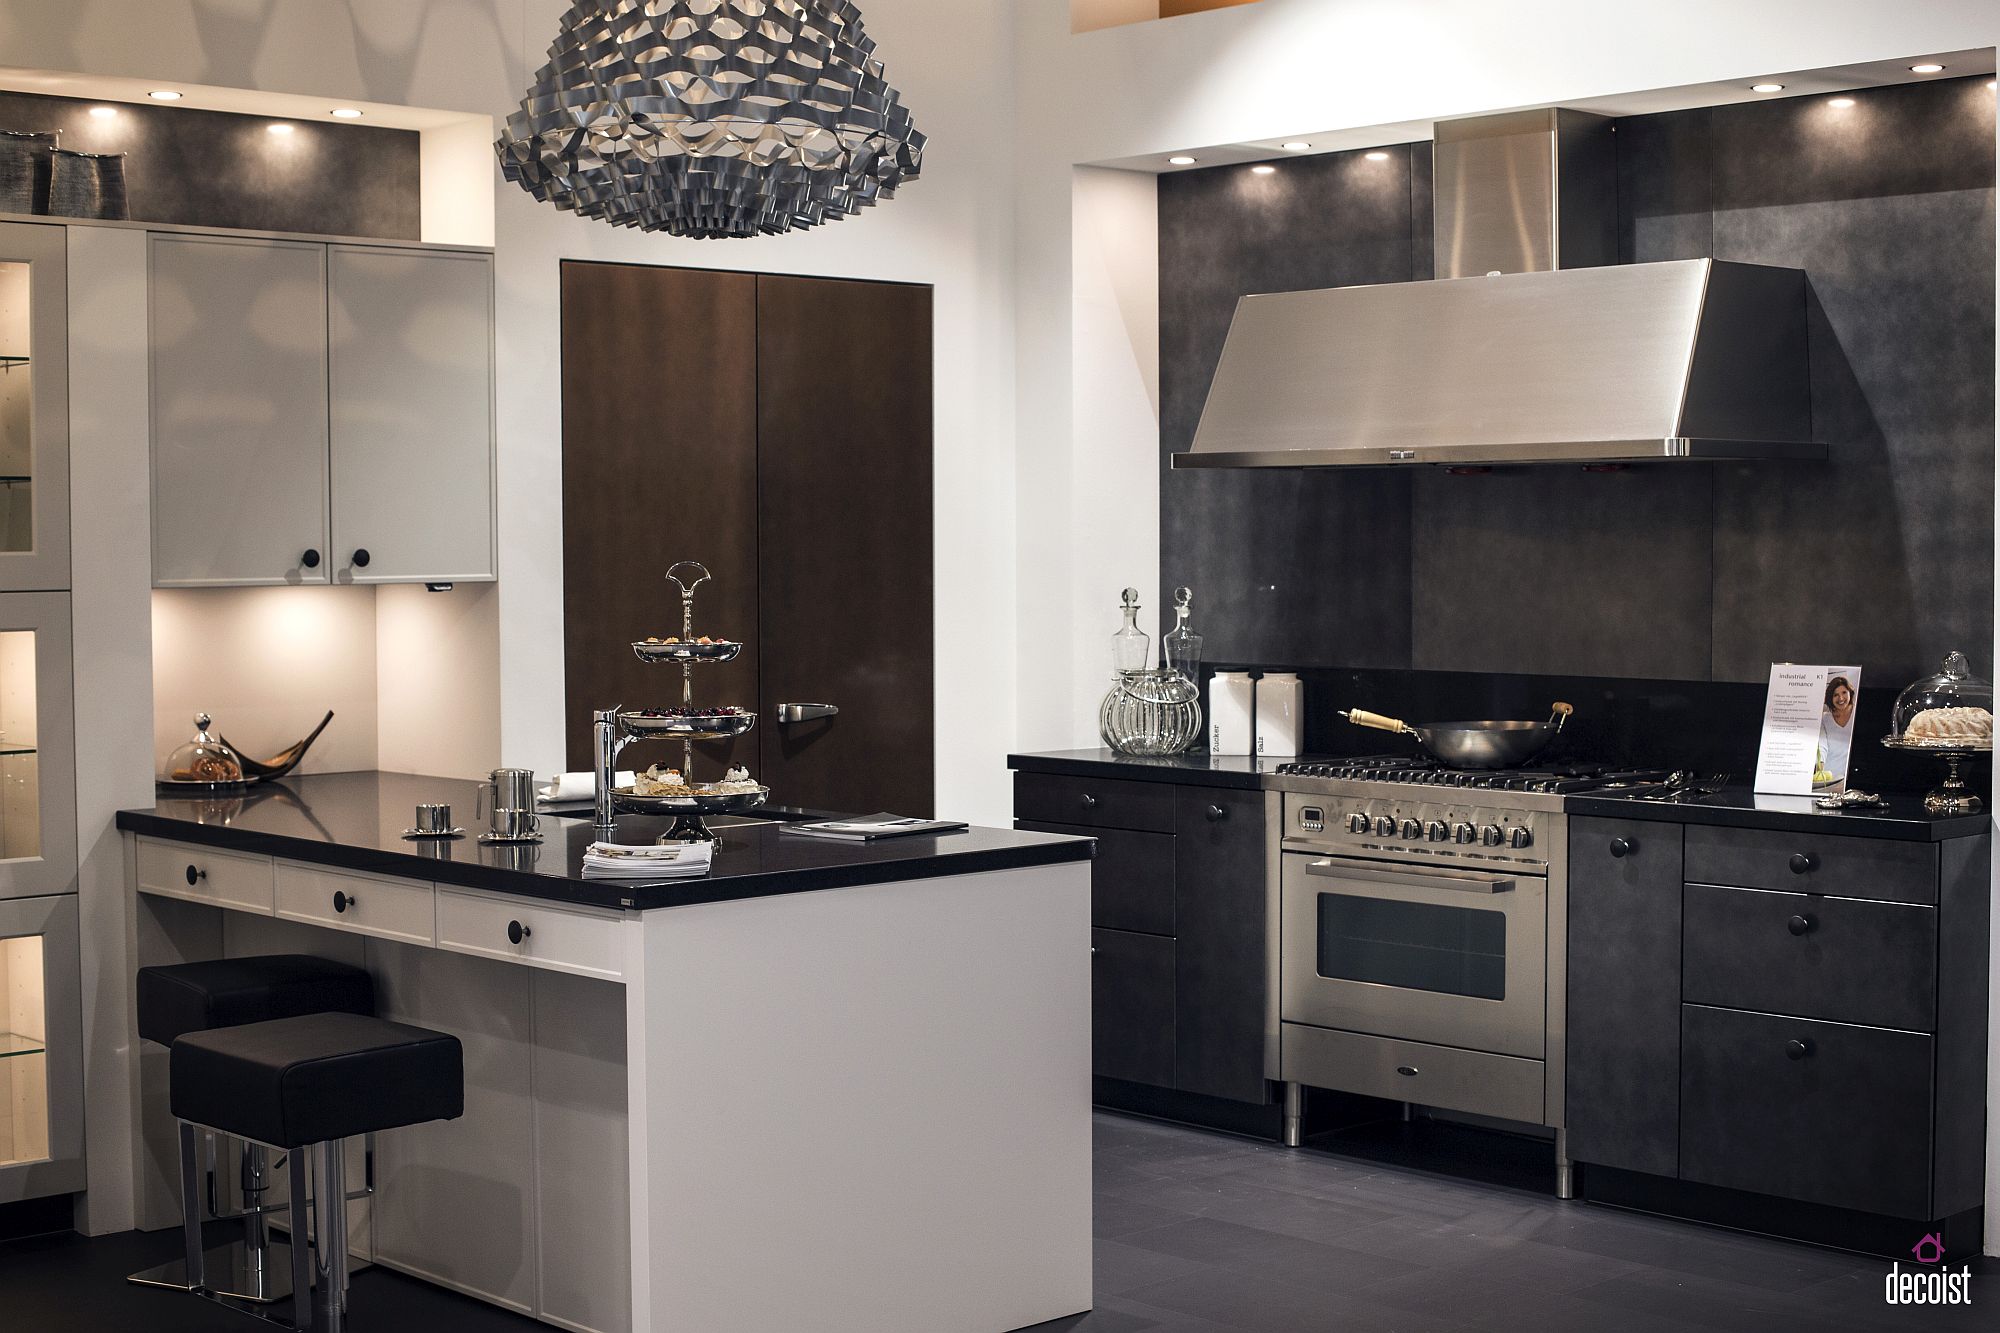 Black coupled with white and gray in the kitchen